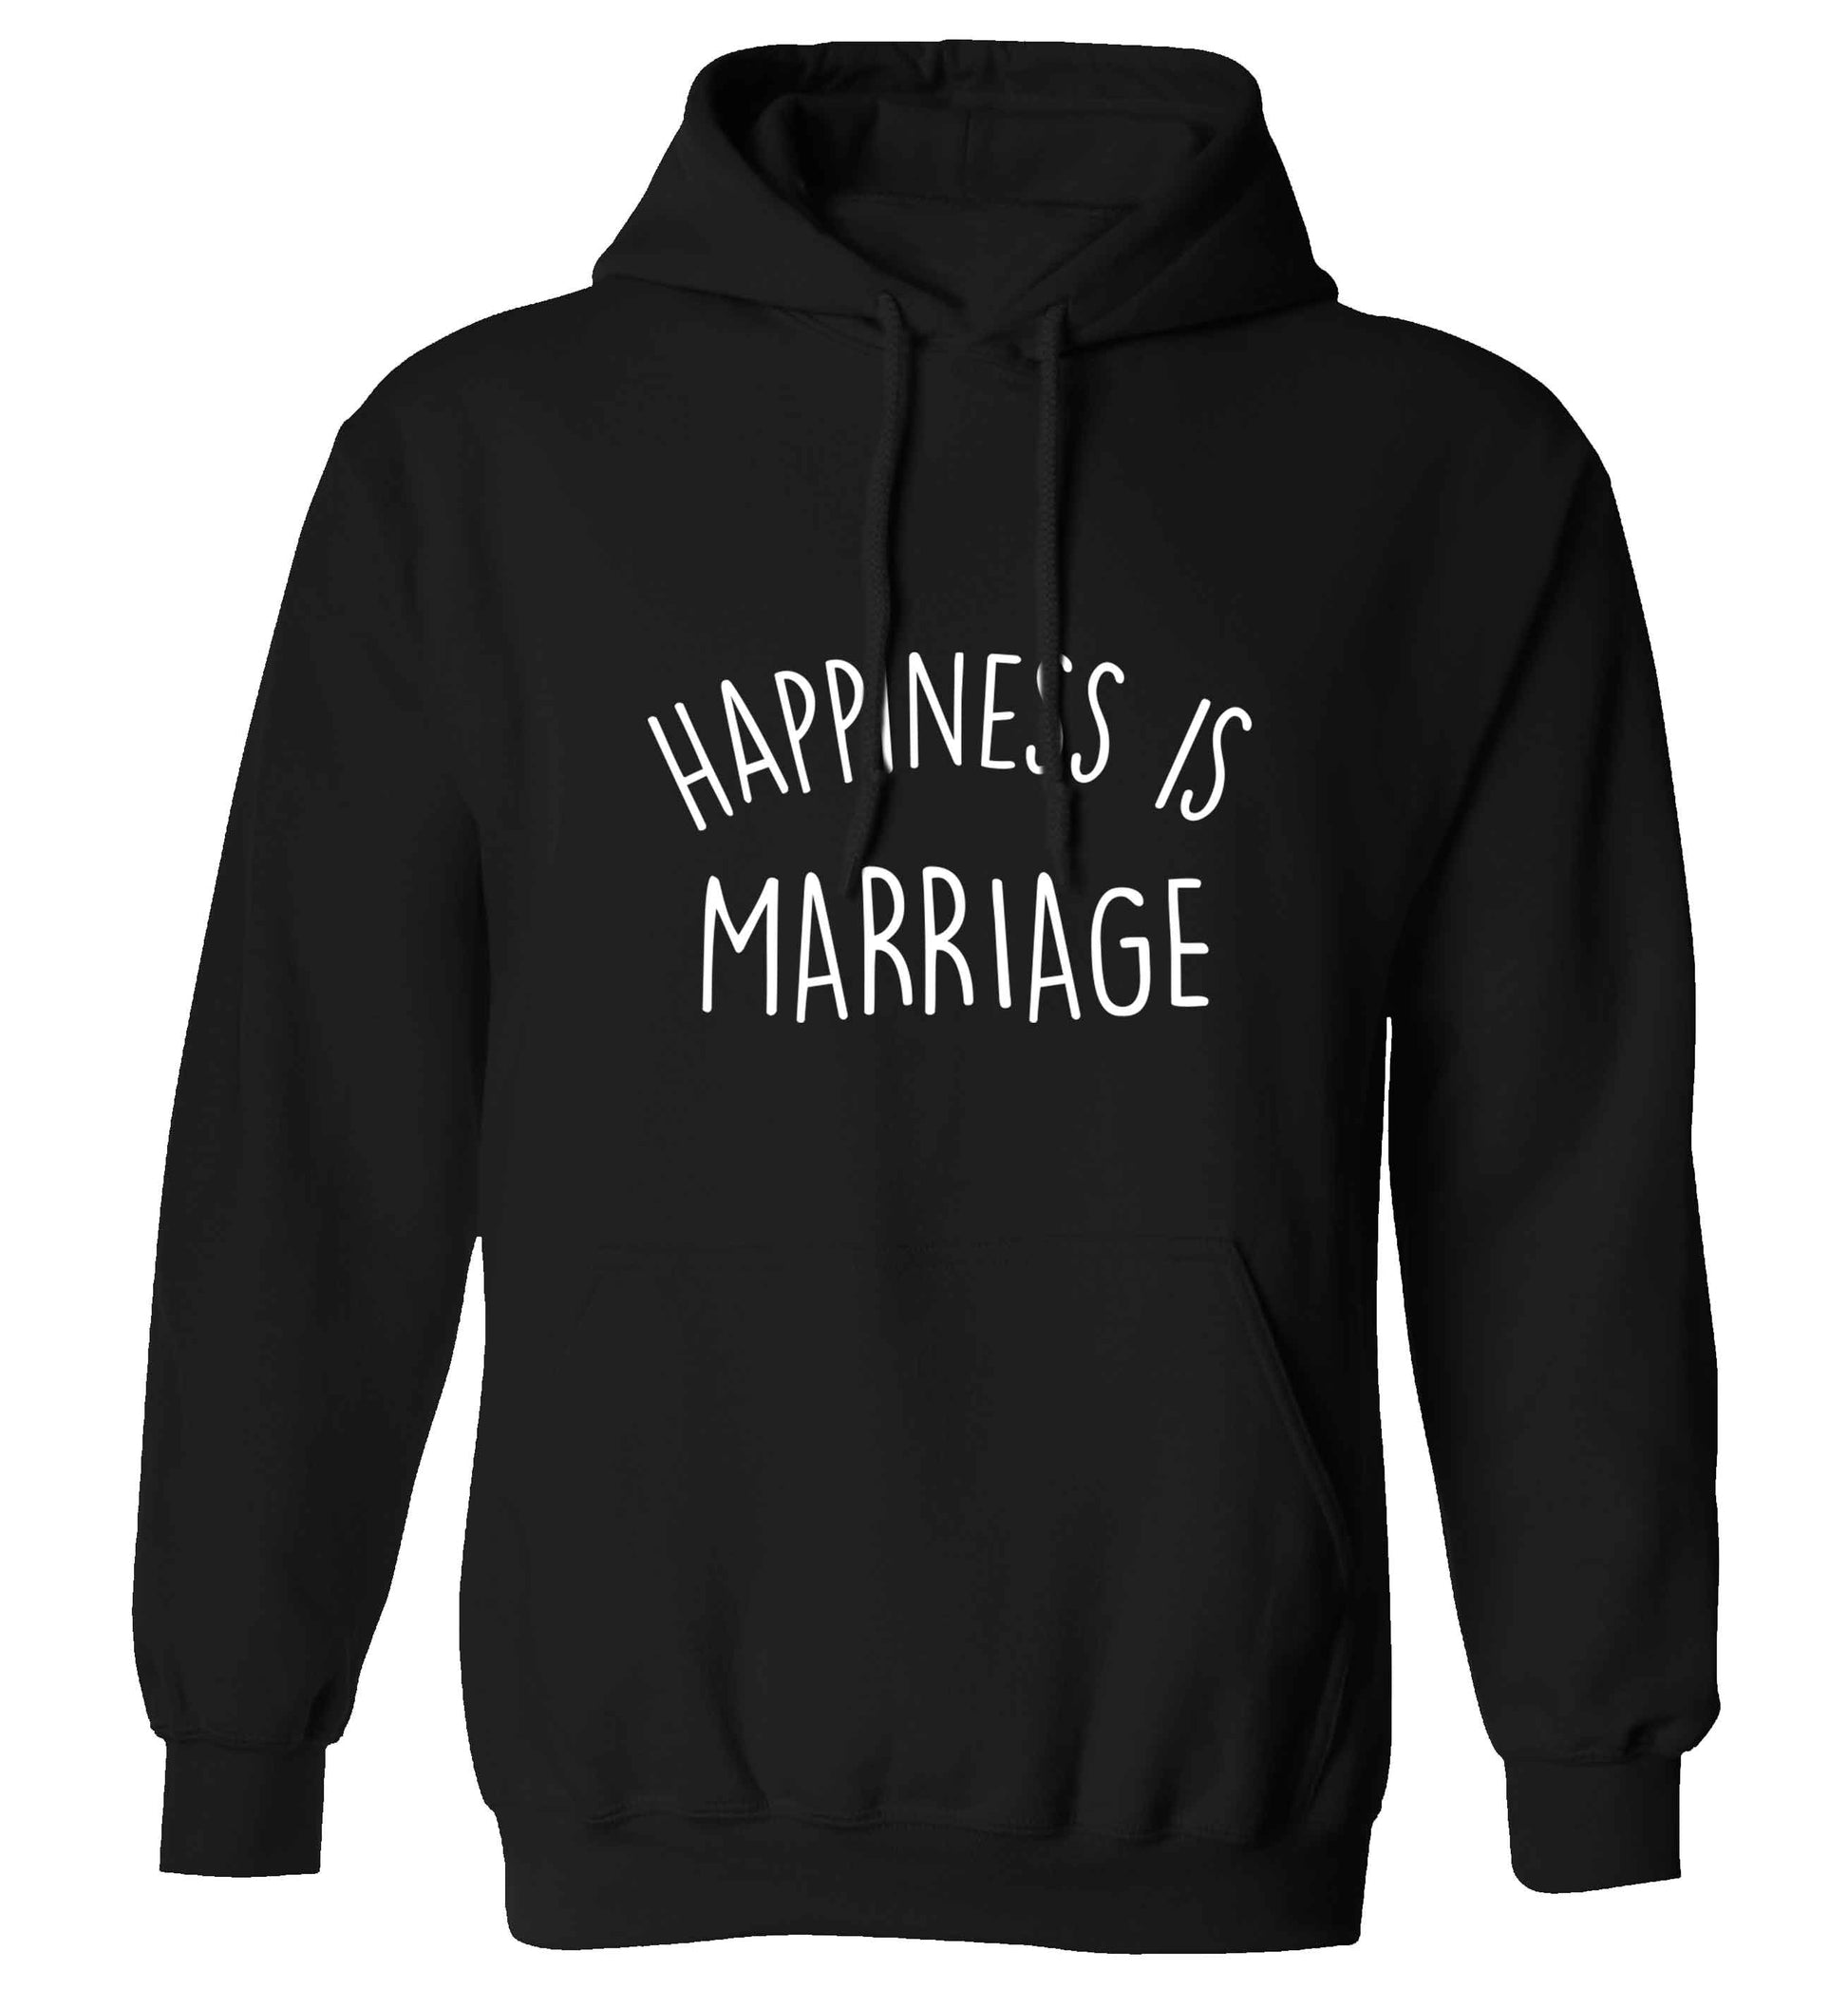 Happiness is wedding planning adults unisex black hoodie 2XL